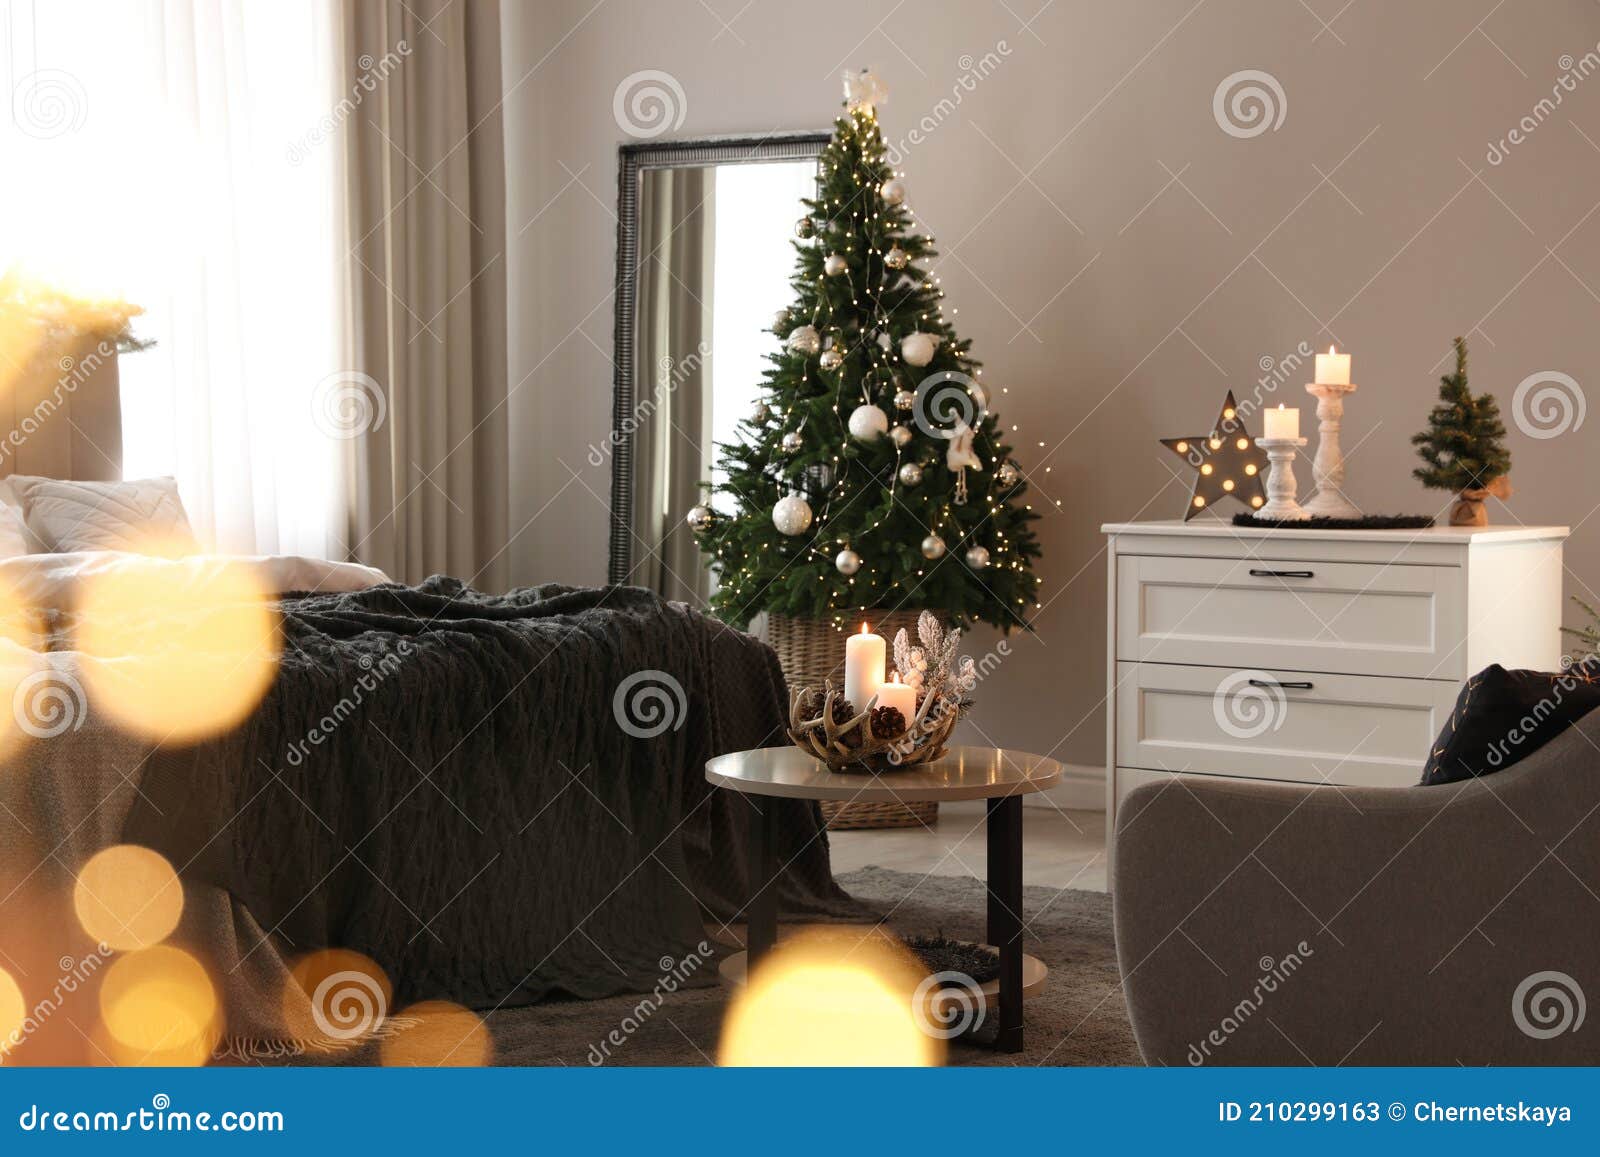 Beautiful Decorated Christmas Tree with Fairy Lights in Bedroom ...